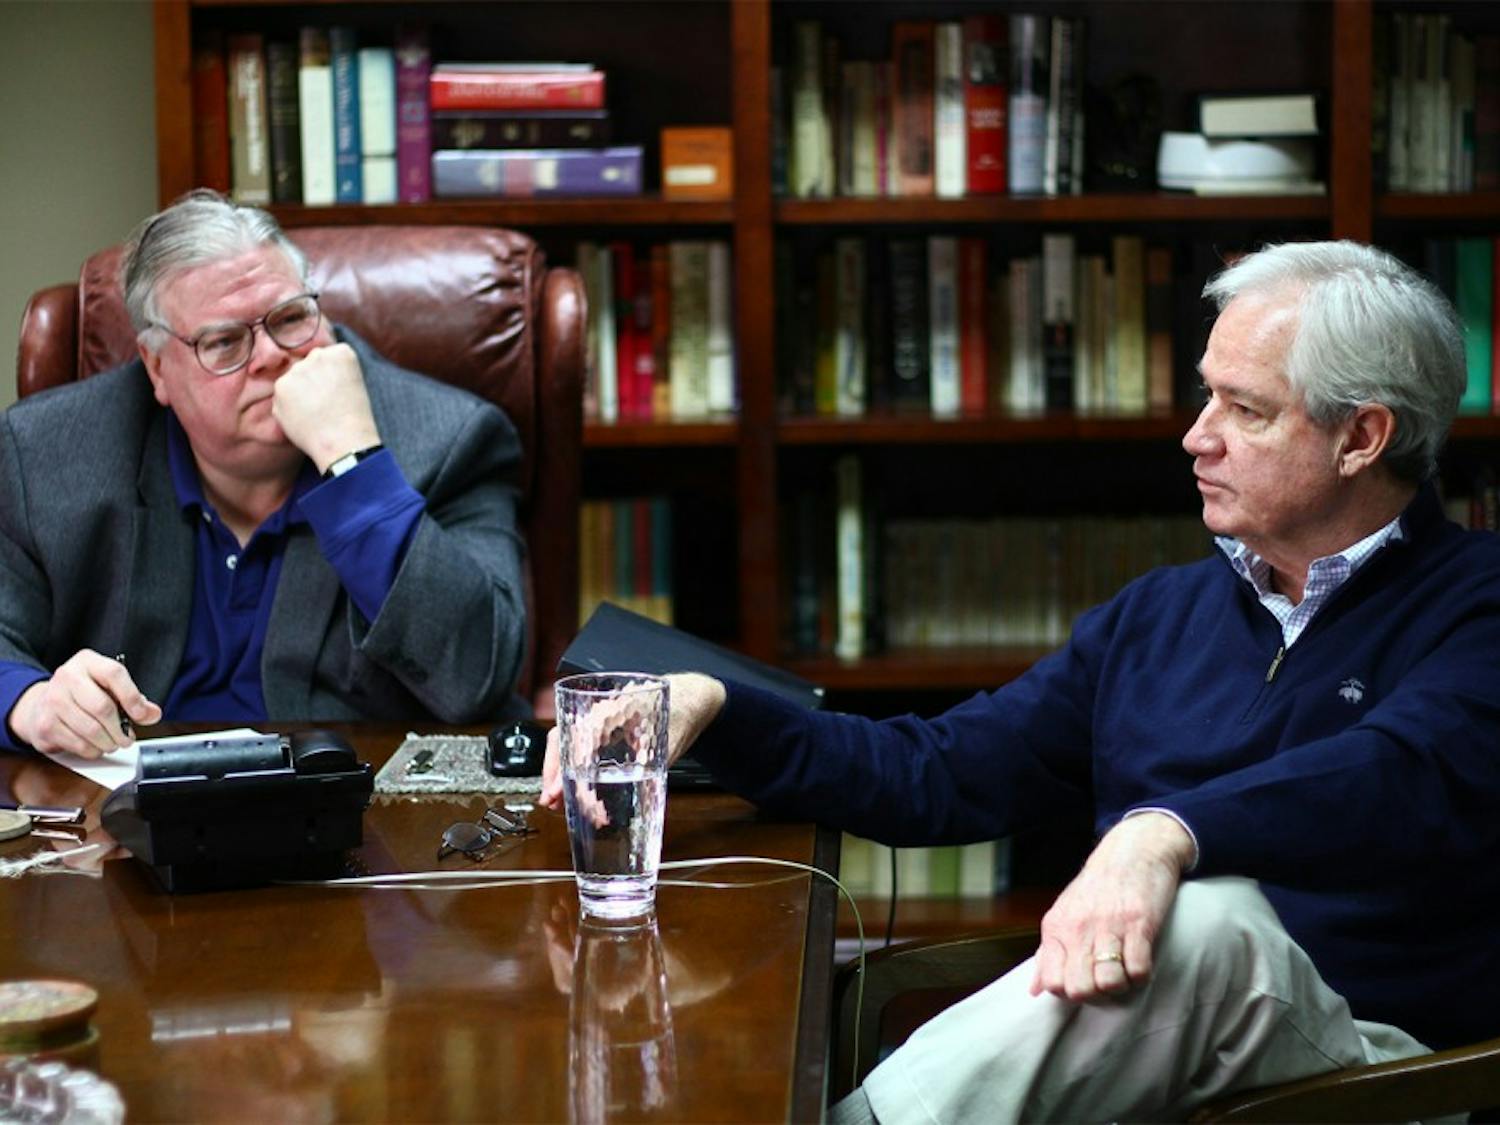 Political consultants Carter Wrenn (left) and Gary Pearce meet in Wrenn's office Wednesday. The two have been friends for several years and have collaborated on a blog for 10 years.